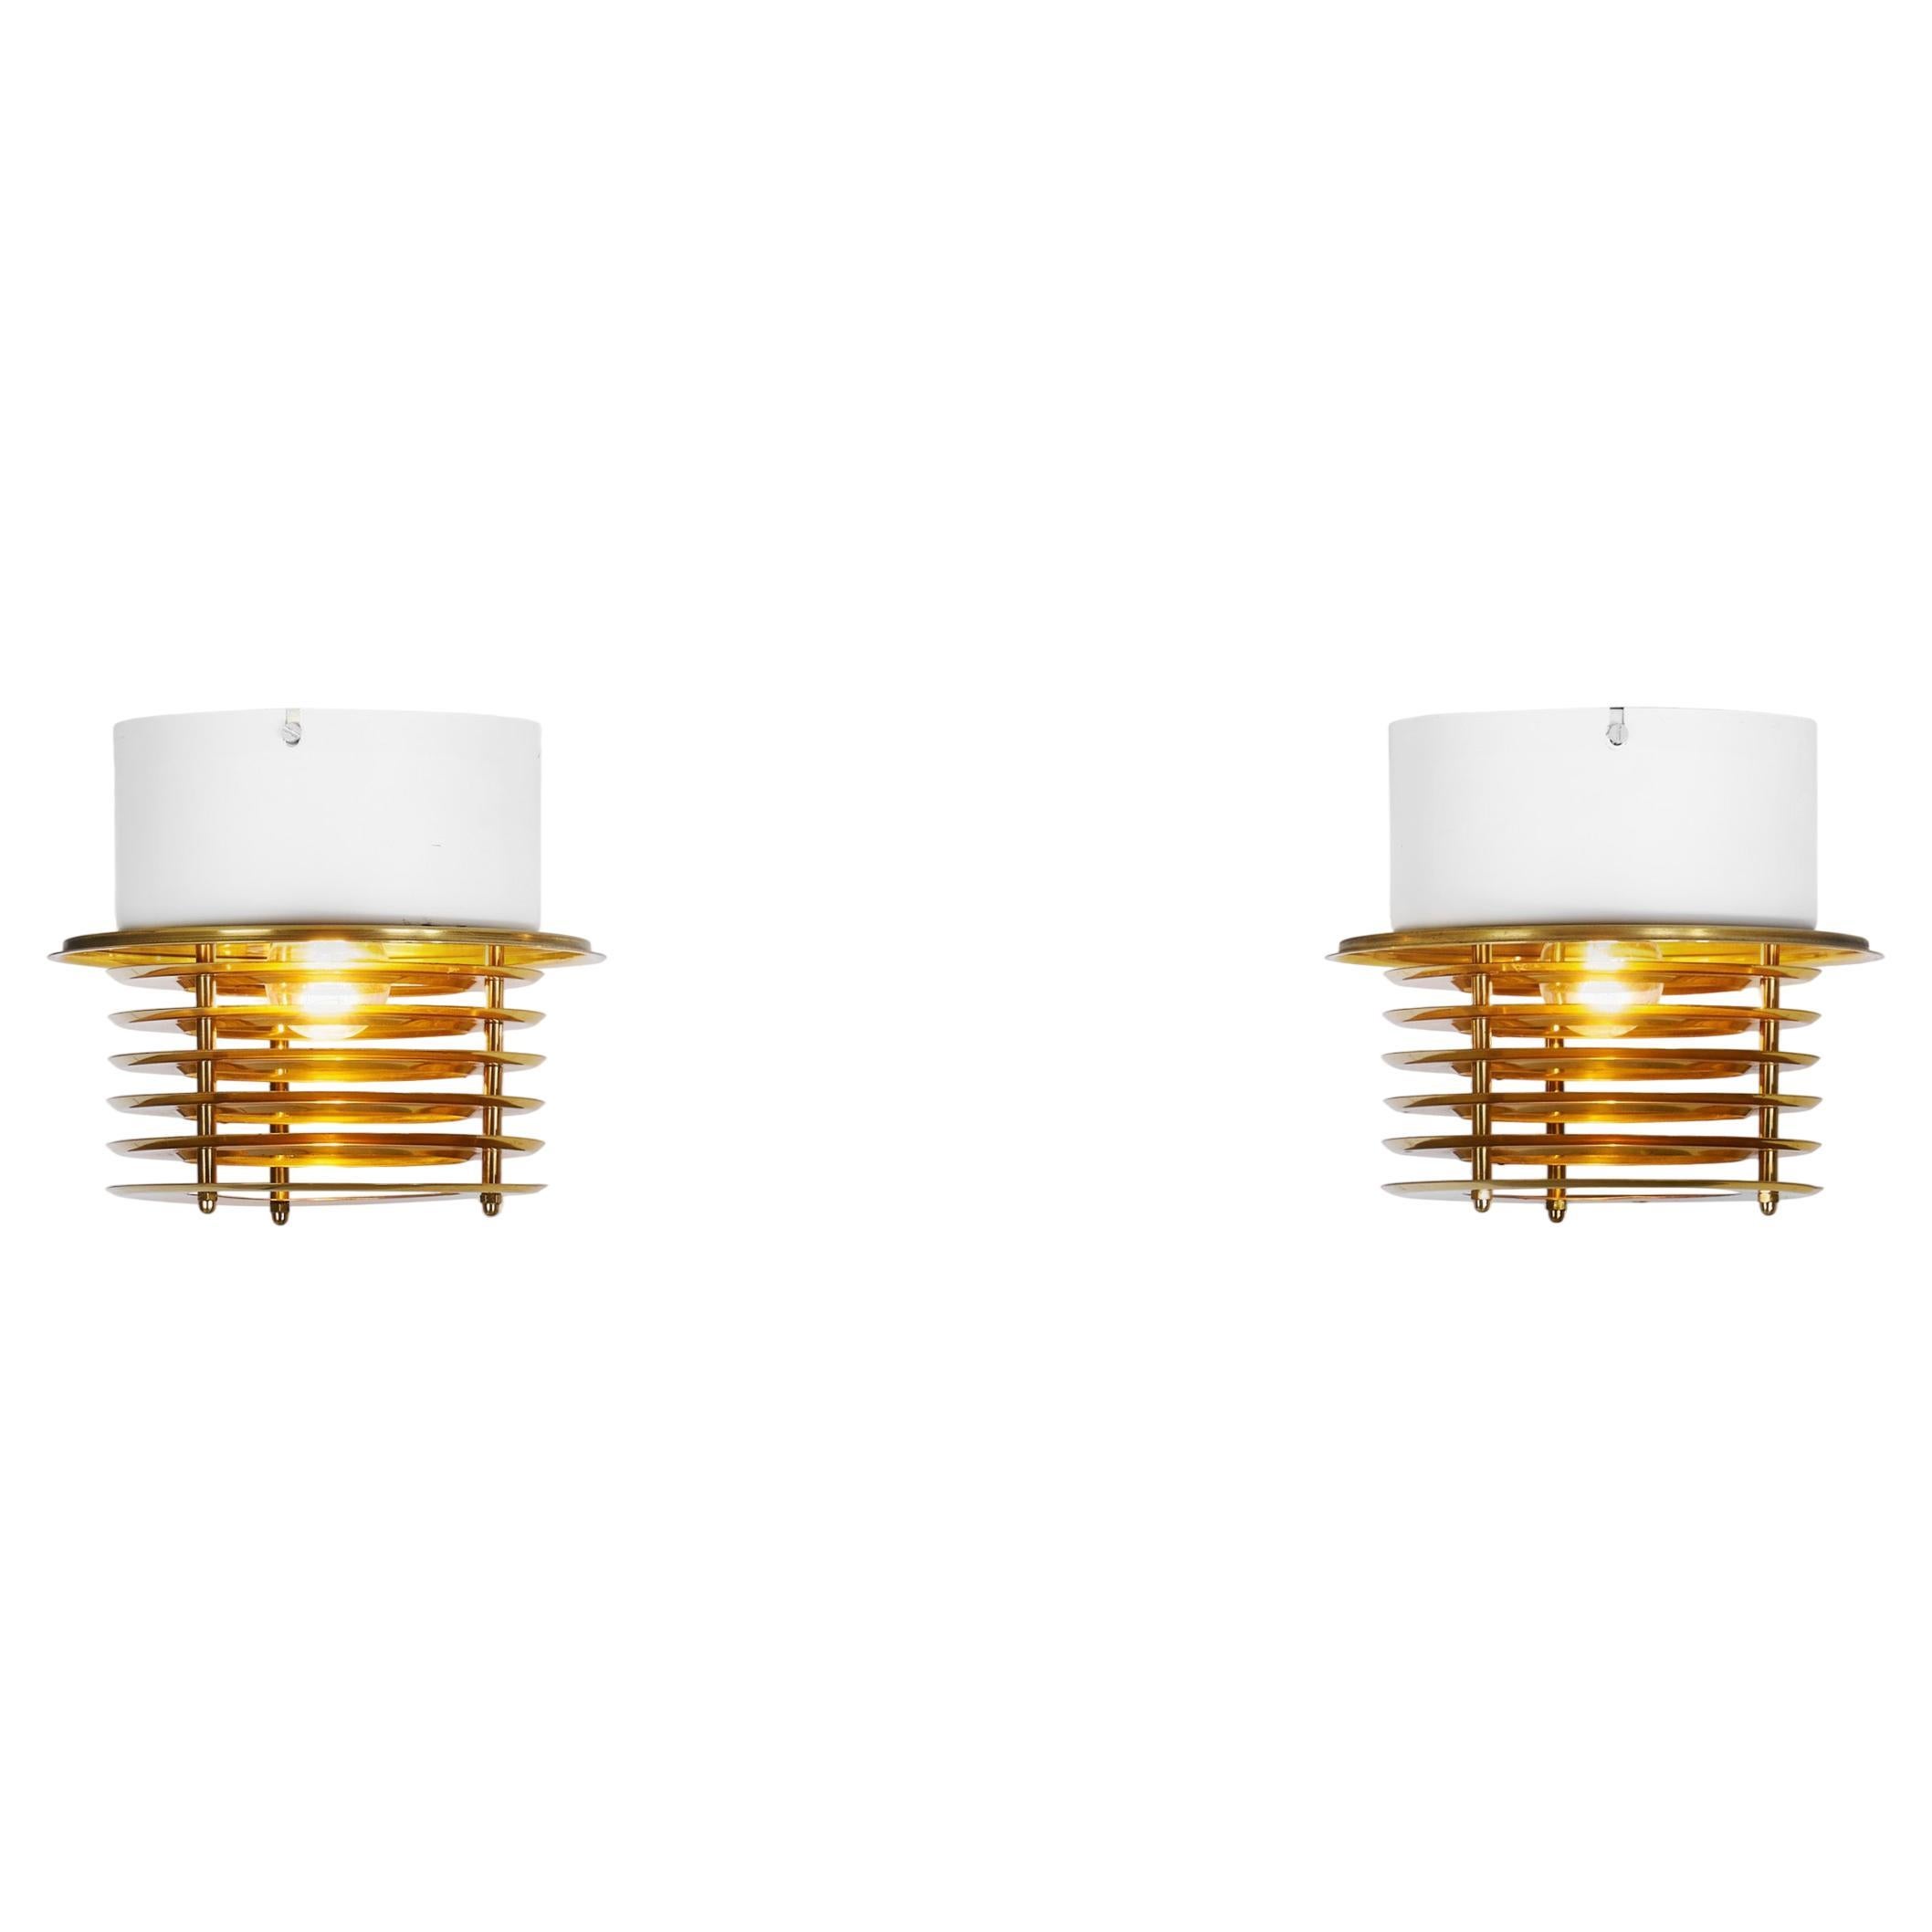 Brass and Metal Ceiling Lamps by Taiba-Falkenberg Belysnin, Sweden 1960s For Sale